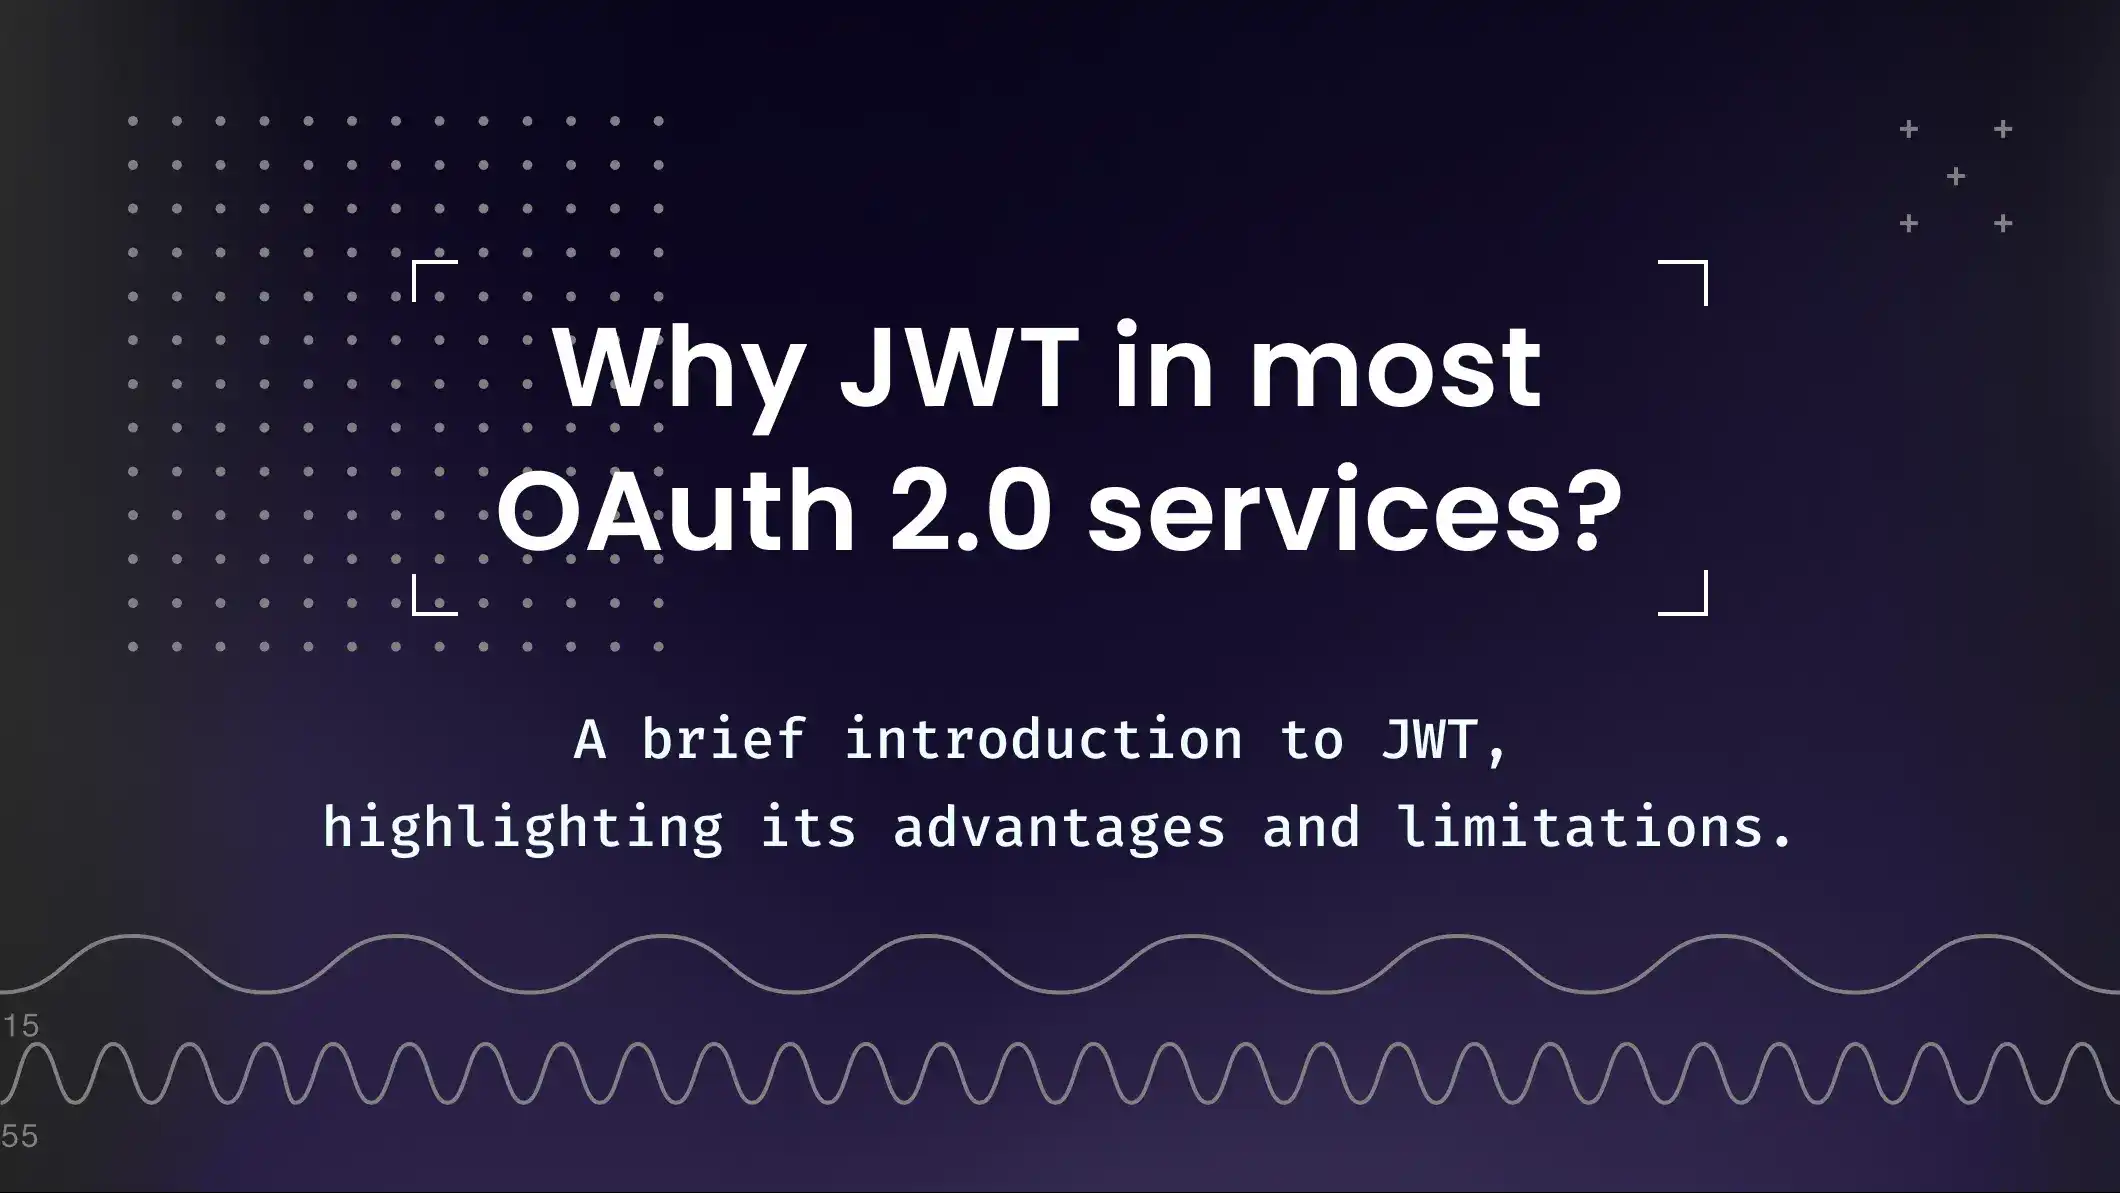 Why JWT in most OAuth 2.0 services